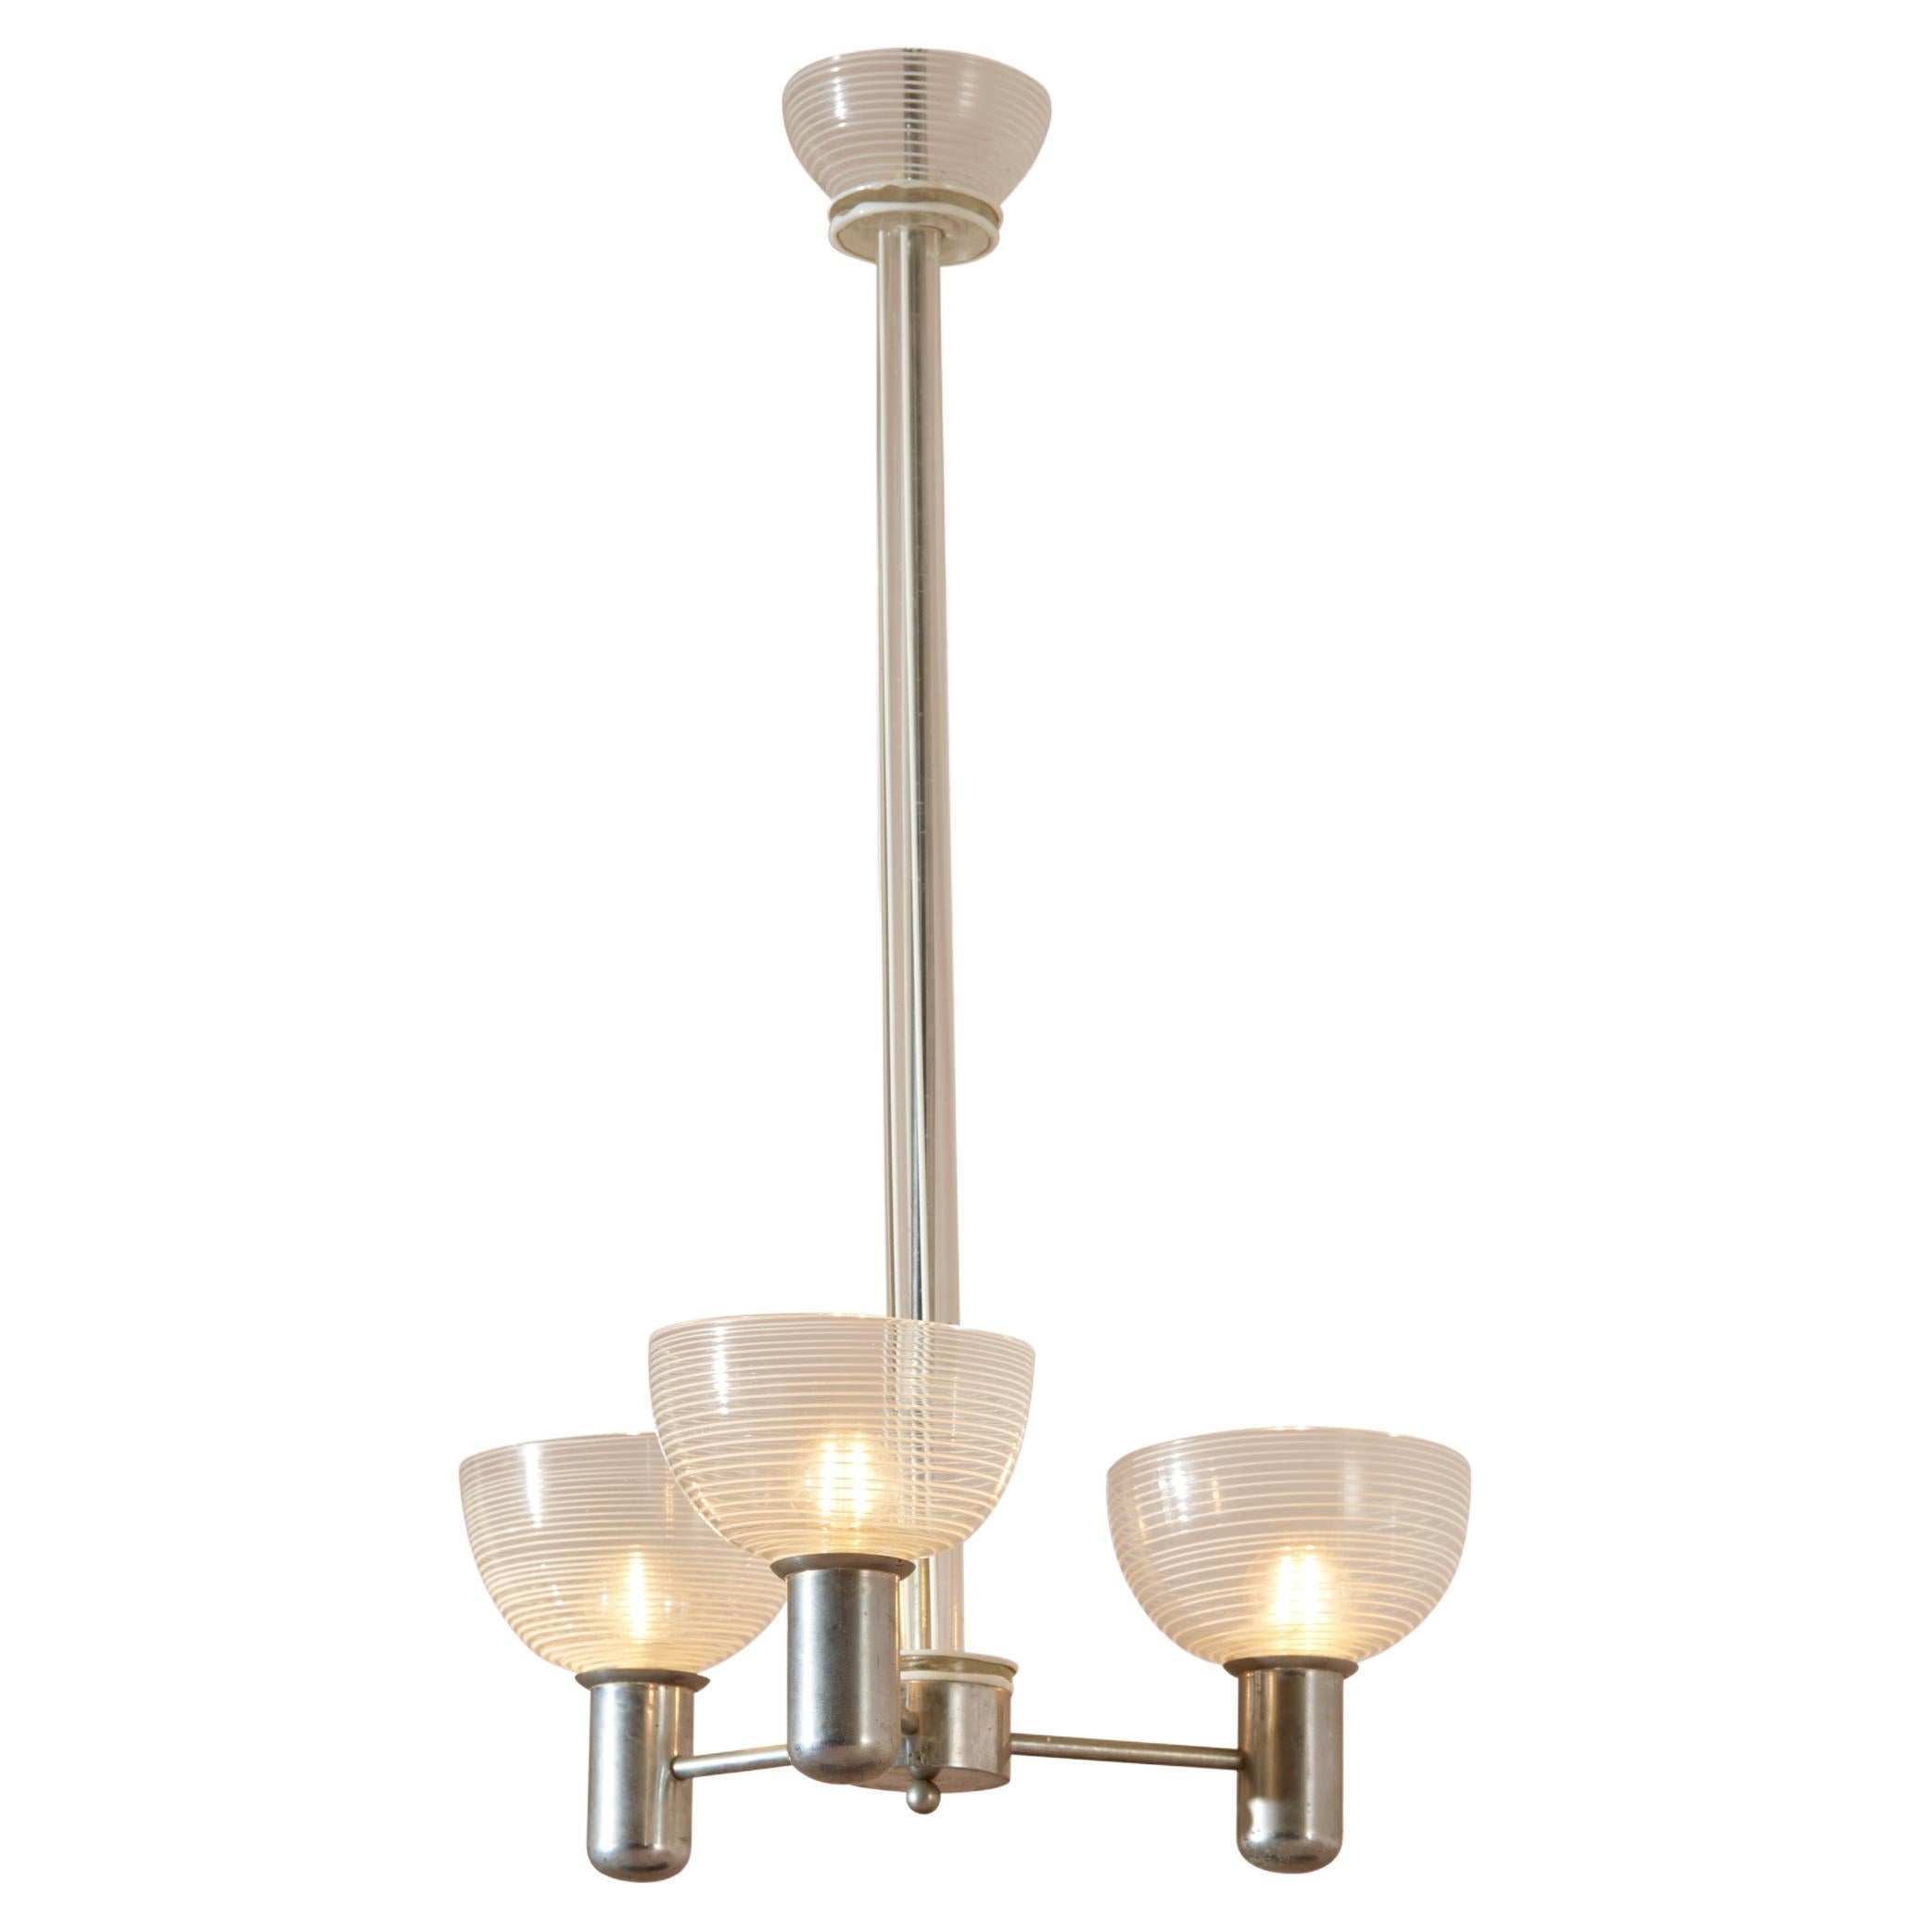 Murano Rationalist Chandelier with Filigrana and Lattimo Glass, Italy, 1930s